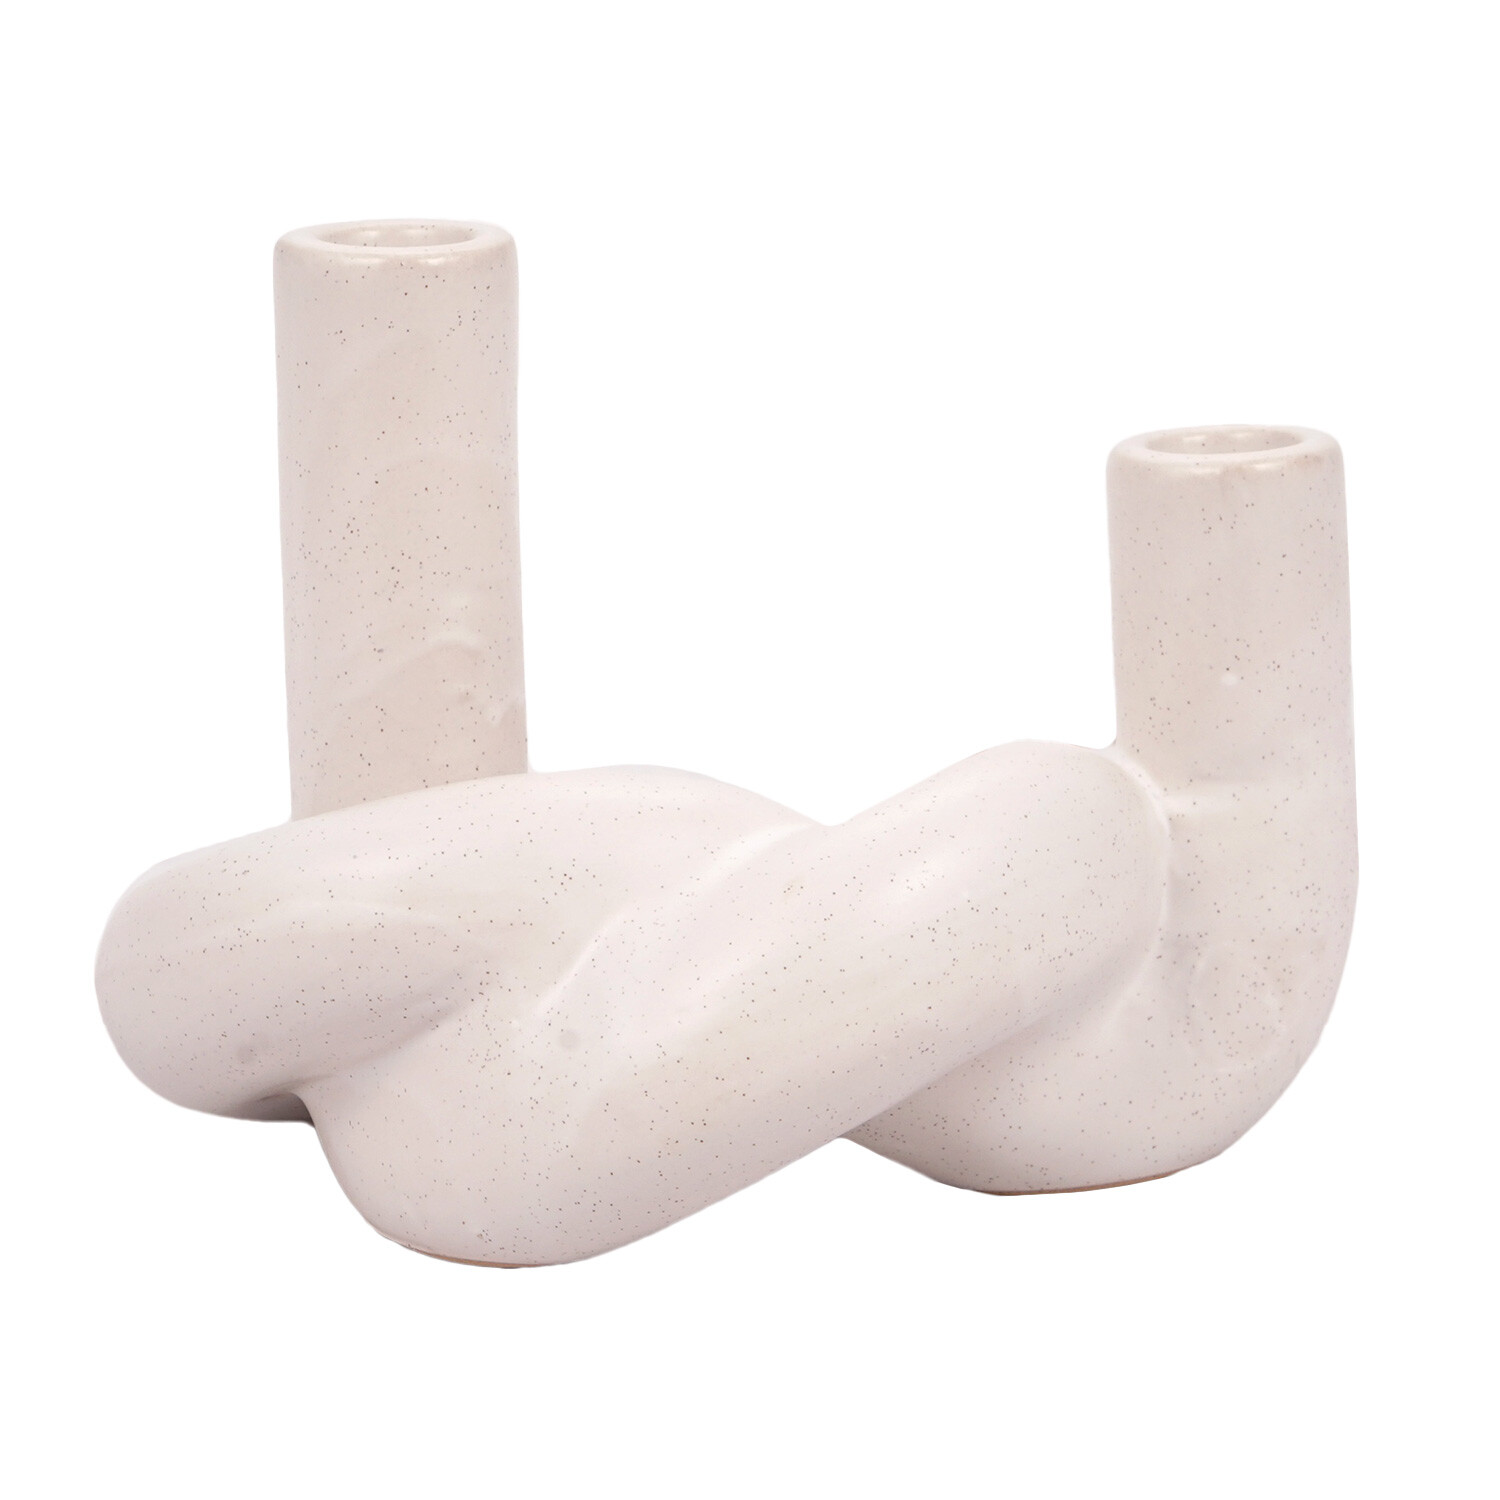 Single White or Black Knot Taper Candle Holder in Assorted styles Image 1